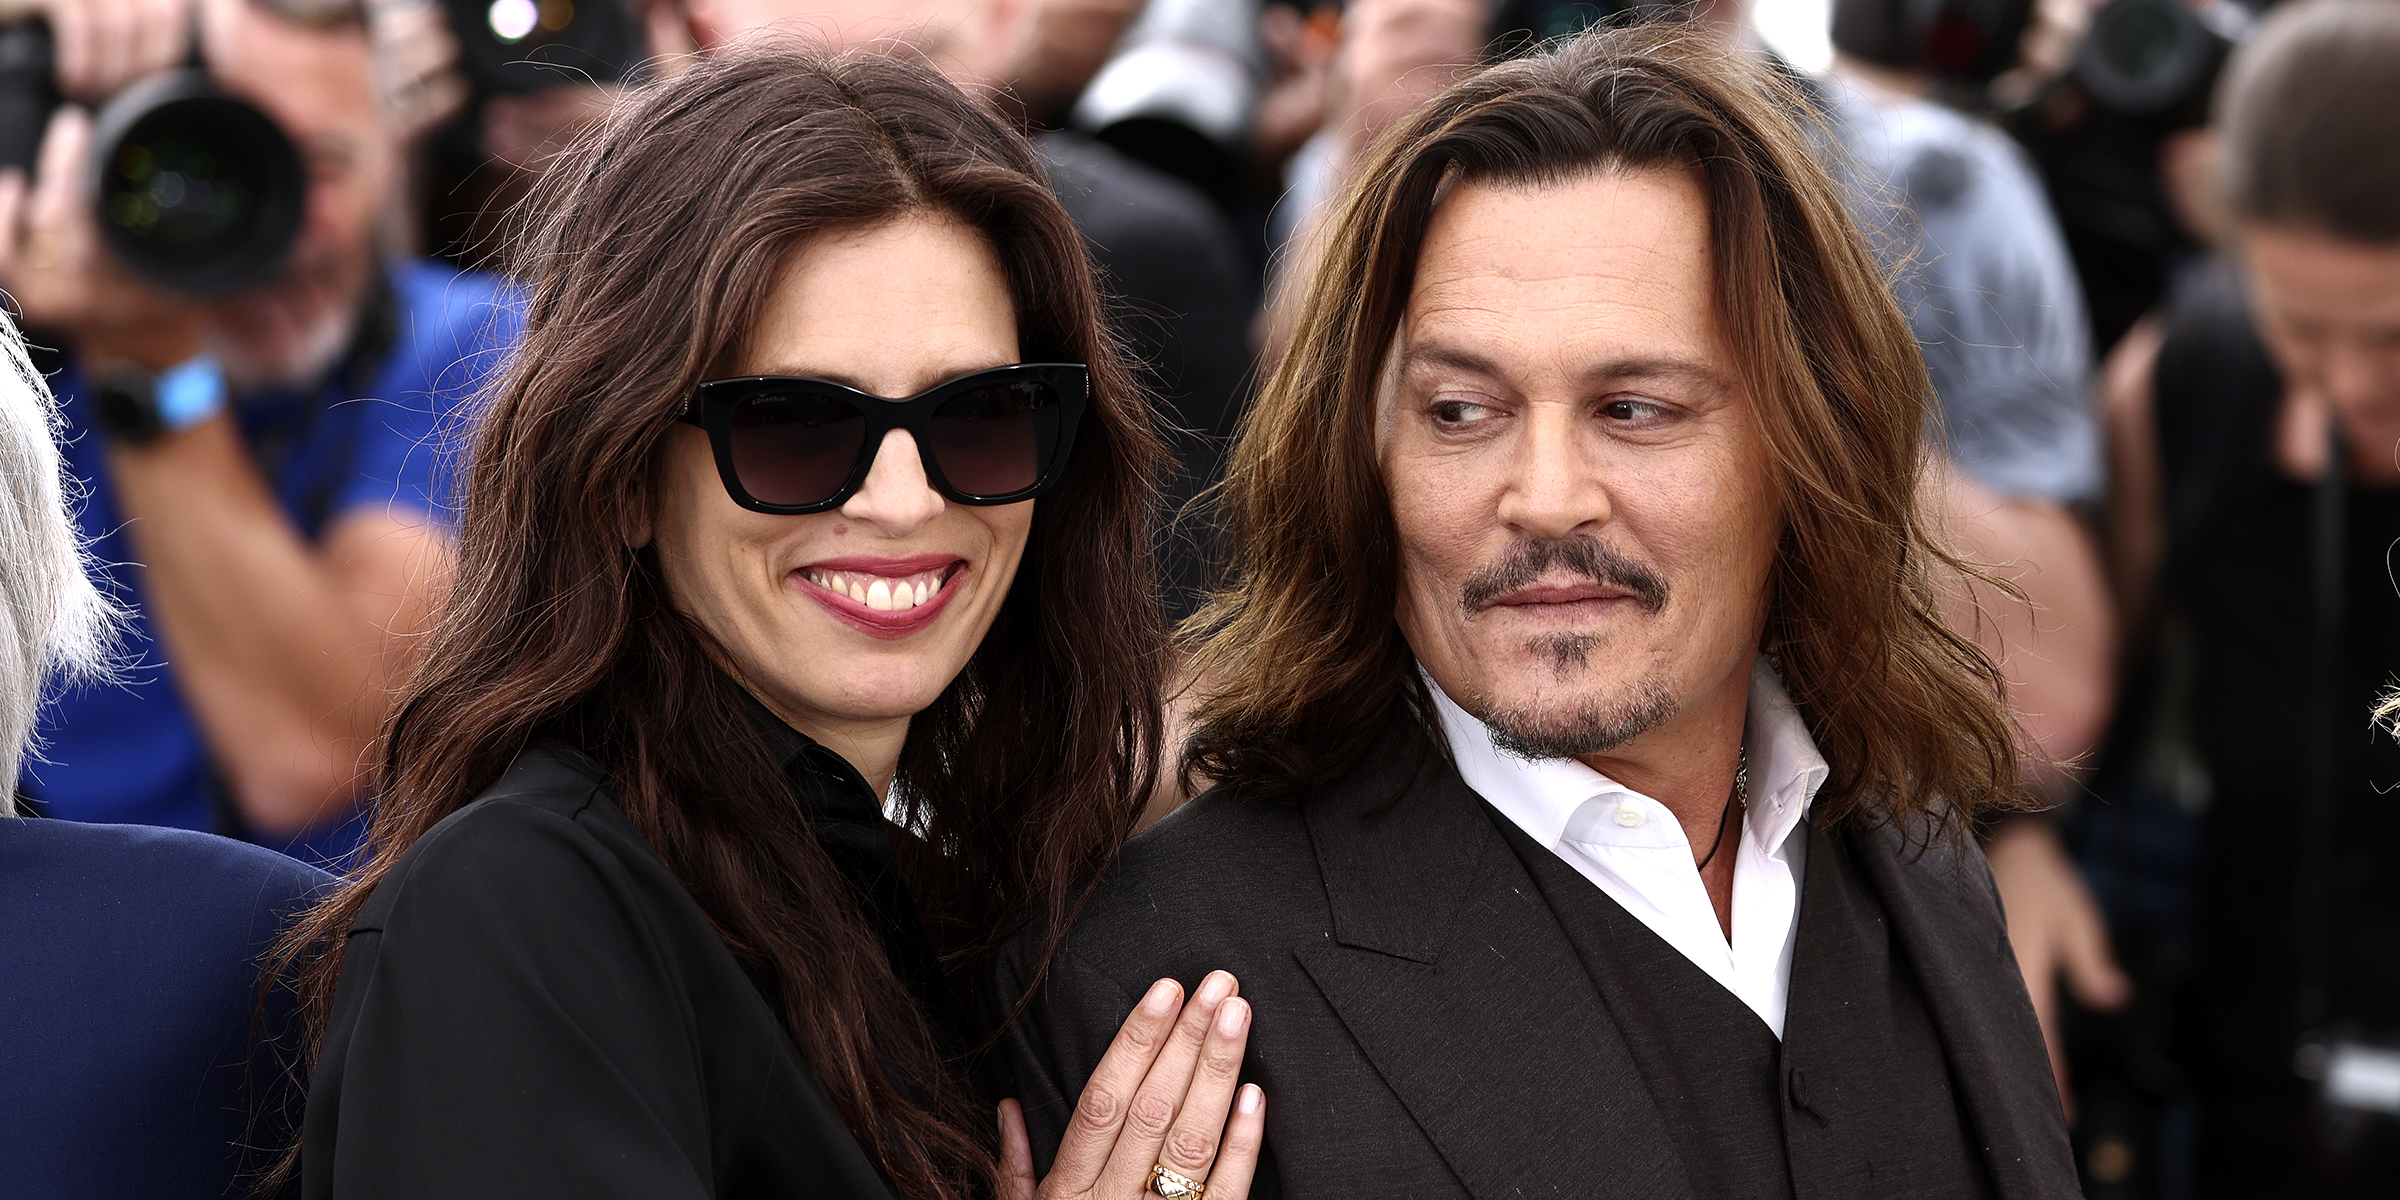 Maïwenn and Johnny Depp. | Source: Getty Images